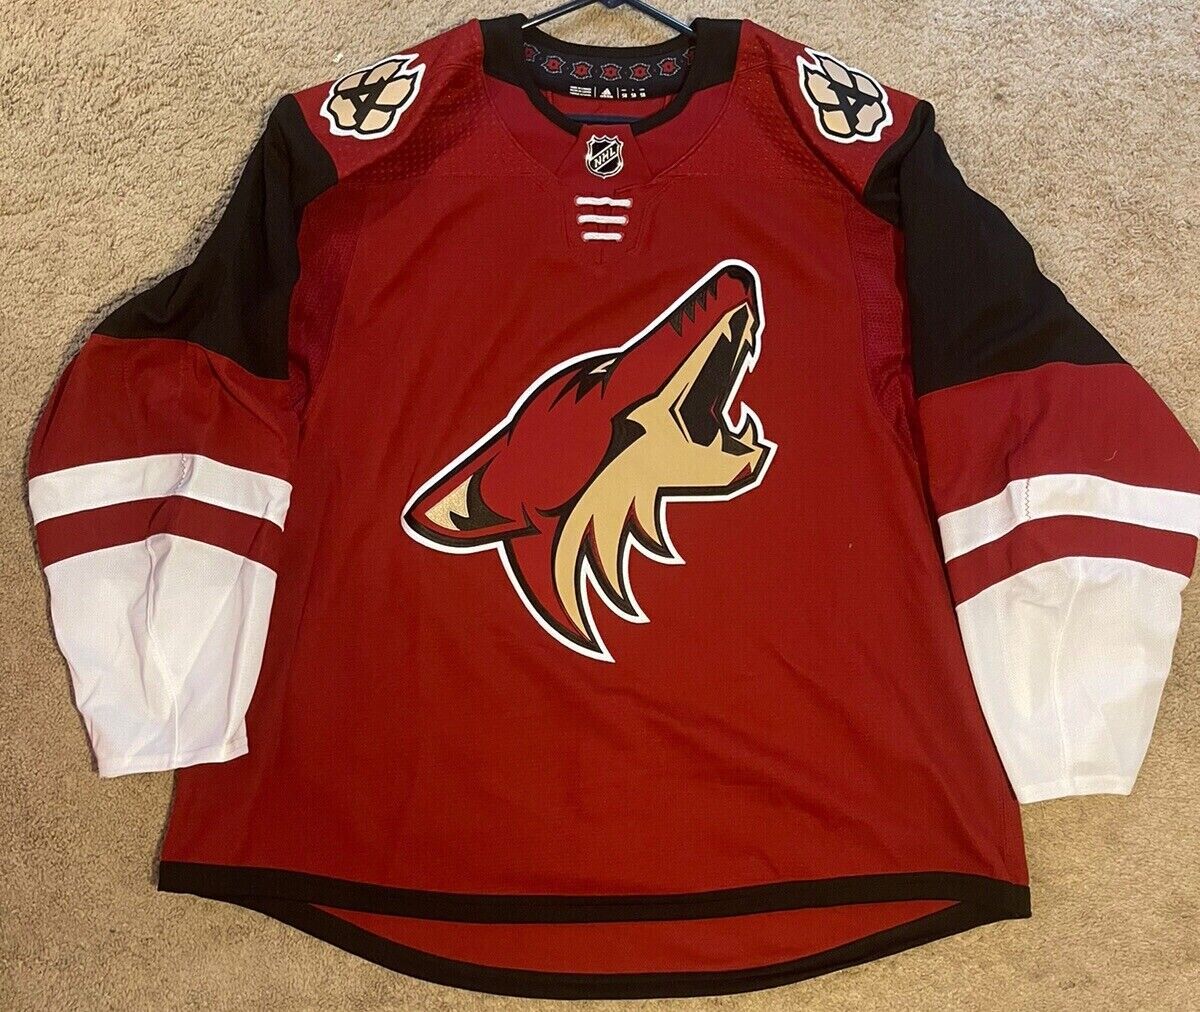 Arizona Coyotes Mic Team Issue Pro Stock Blank Game Jersey Adidas Sz 58 Red Home